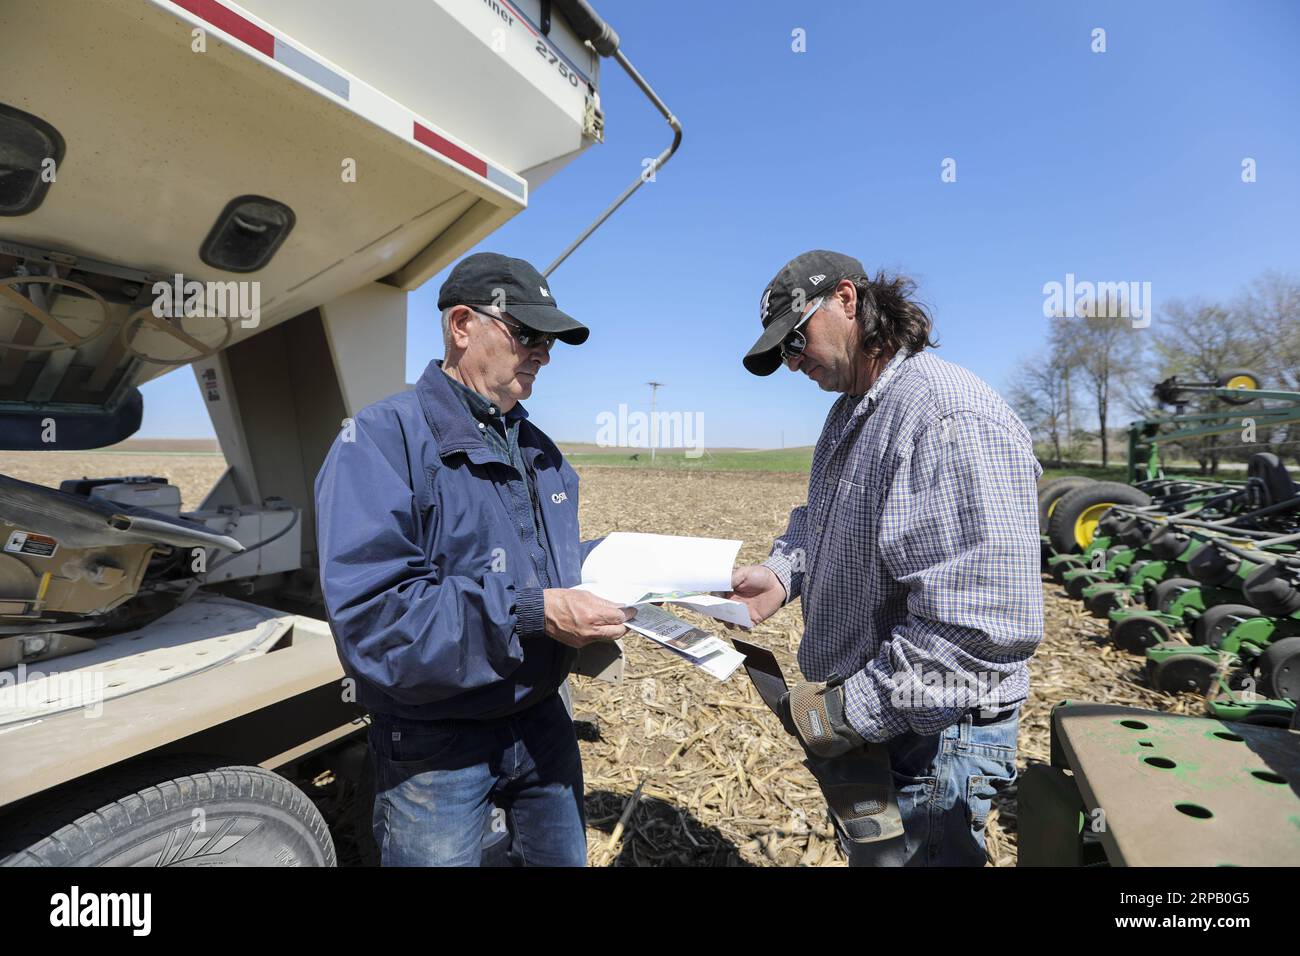 (190523) -- IOWA, May 23, 2019 (Xinhua) -- Bill Pellett and his son Bret checks the purchase record of corn seeds before planting at their family farm in Atlantic of Cass county, Iowa, the United States, April 24, 2019. Bill Pellett knows how to farm, but just like most of his peers across the country, the 71-year-old farmer is feeling less assured of what he could get from a new year of farming, as there appears to be no quick resolution of the year-long trade disputes between the United States and China. TO GO WITH Spotlight: Leading U.S. farming state enters new crop season amid uncertainty Stock Photo